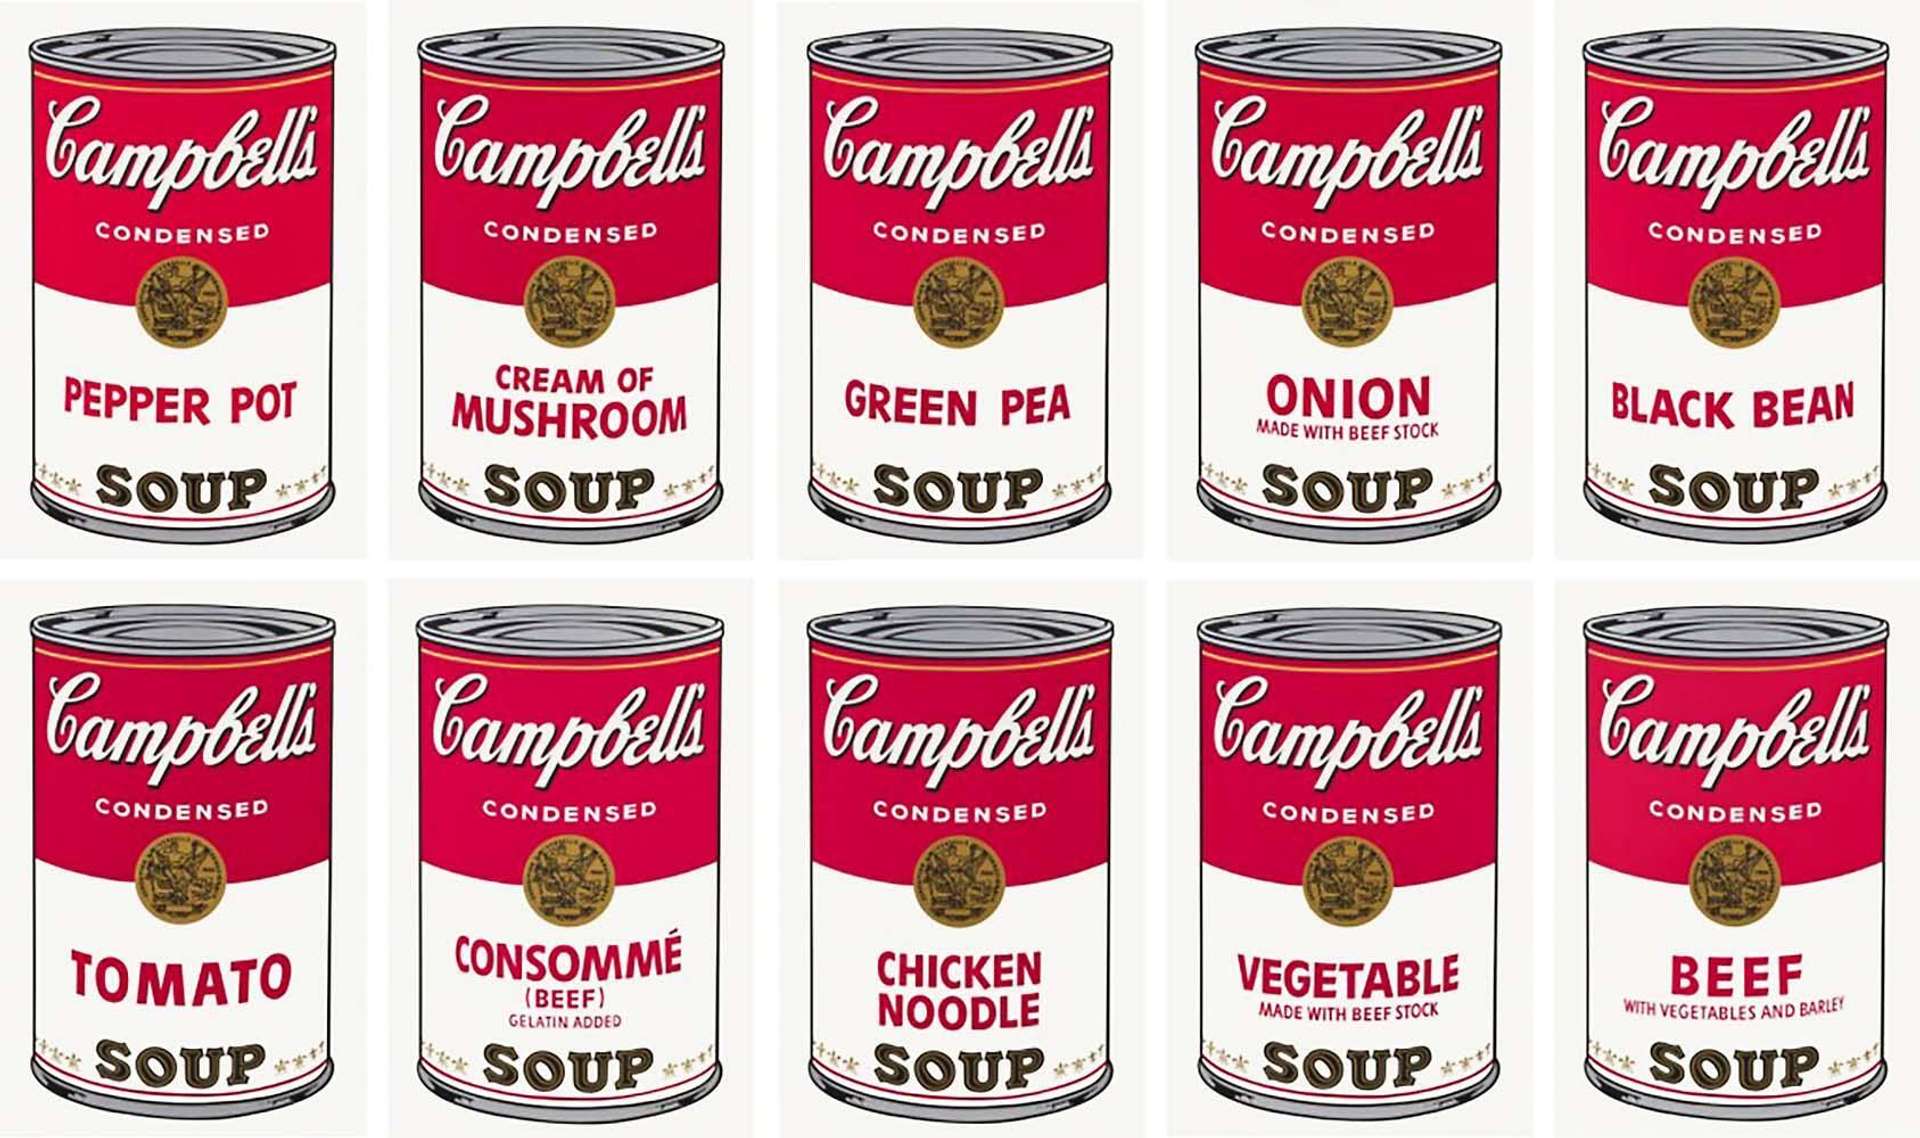 Campbell's Soup by Andy Warhol